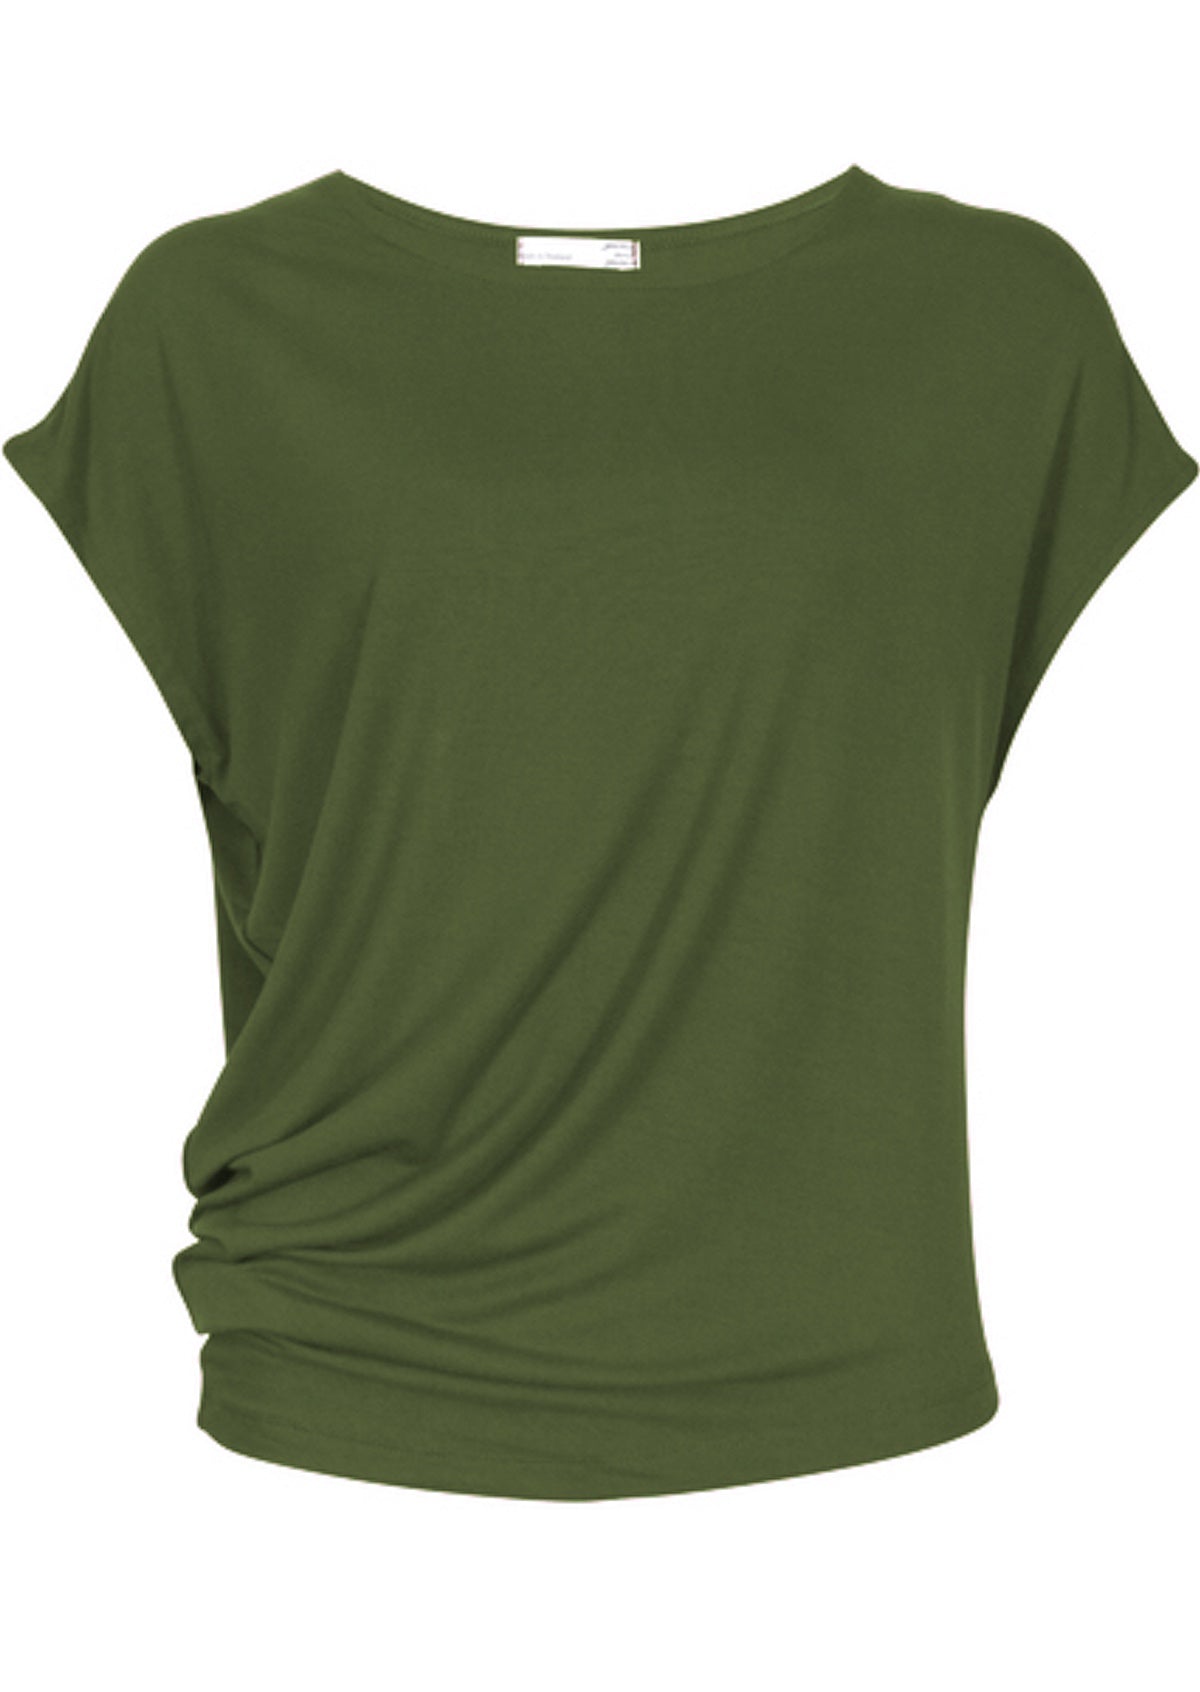 Front view womens olive green rayon top